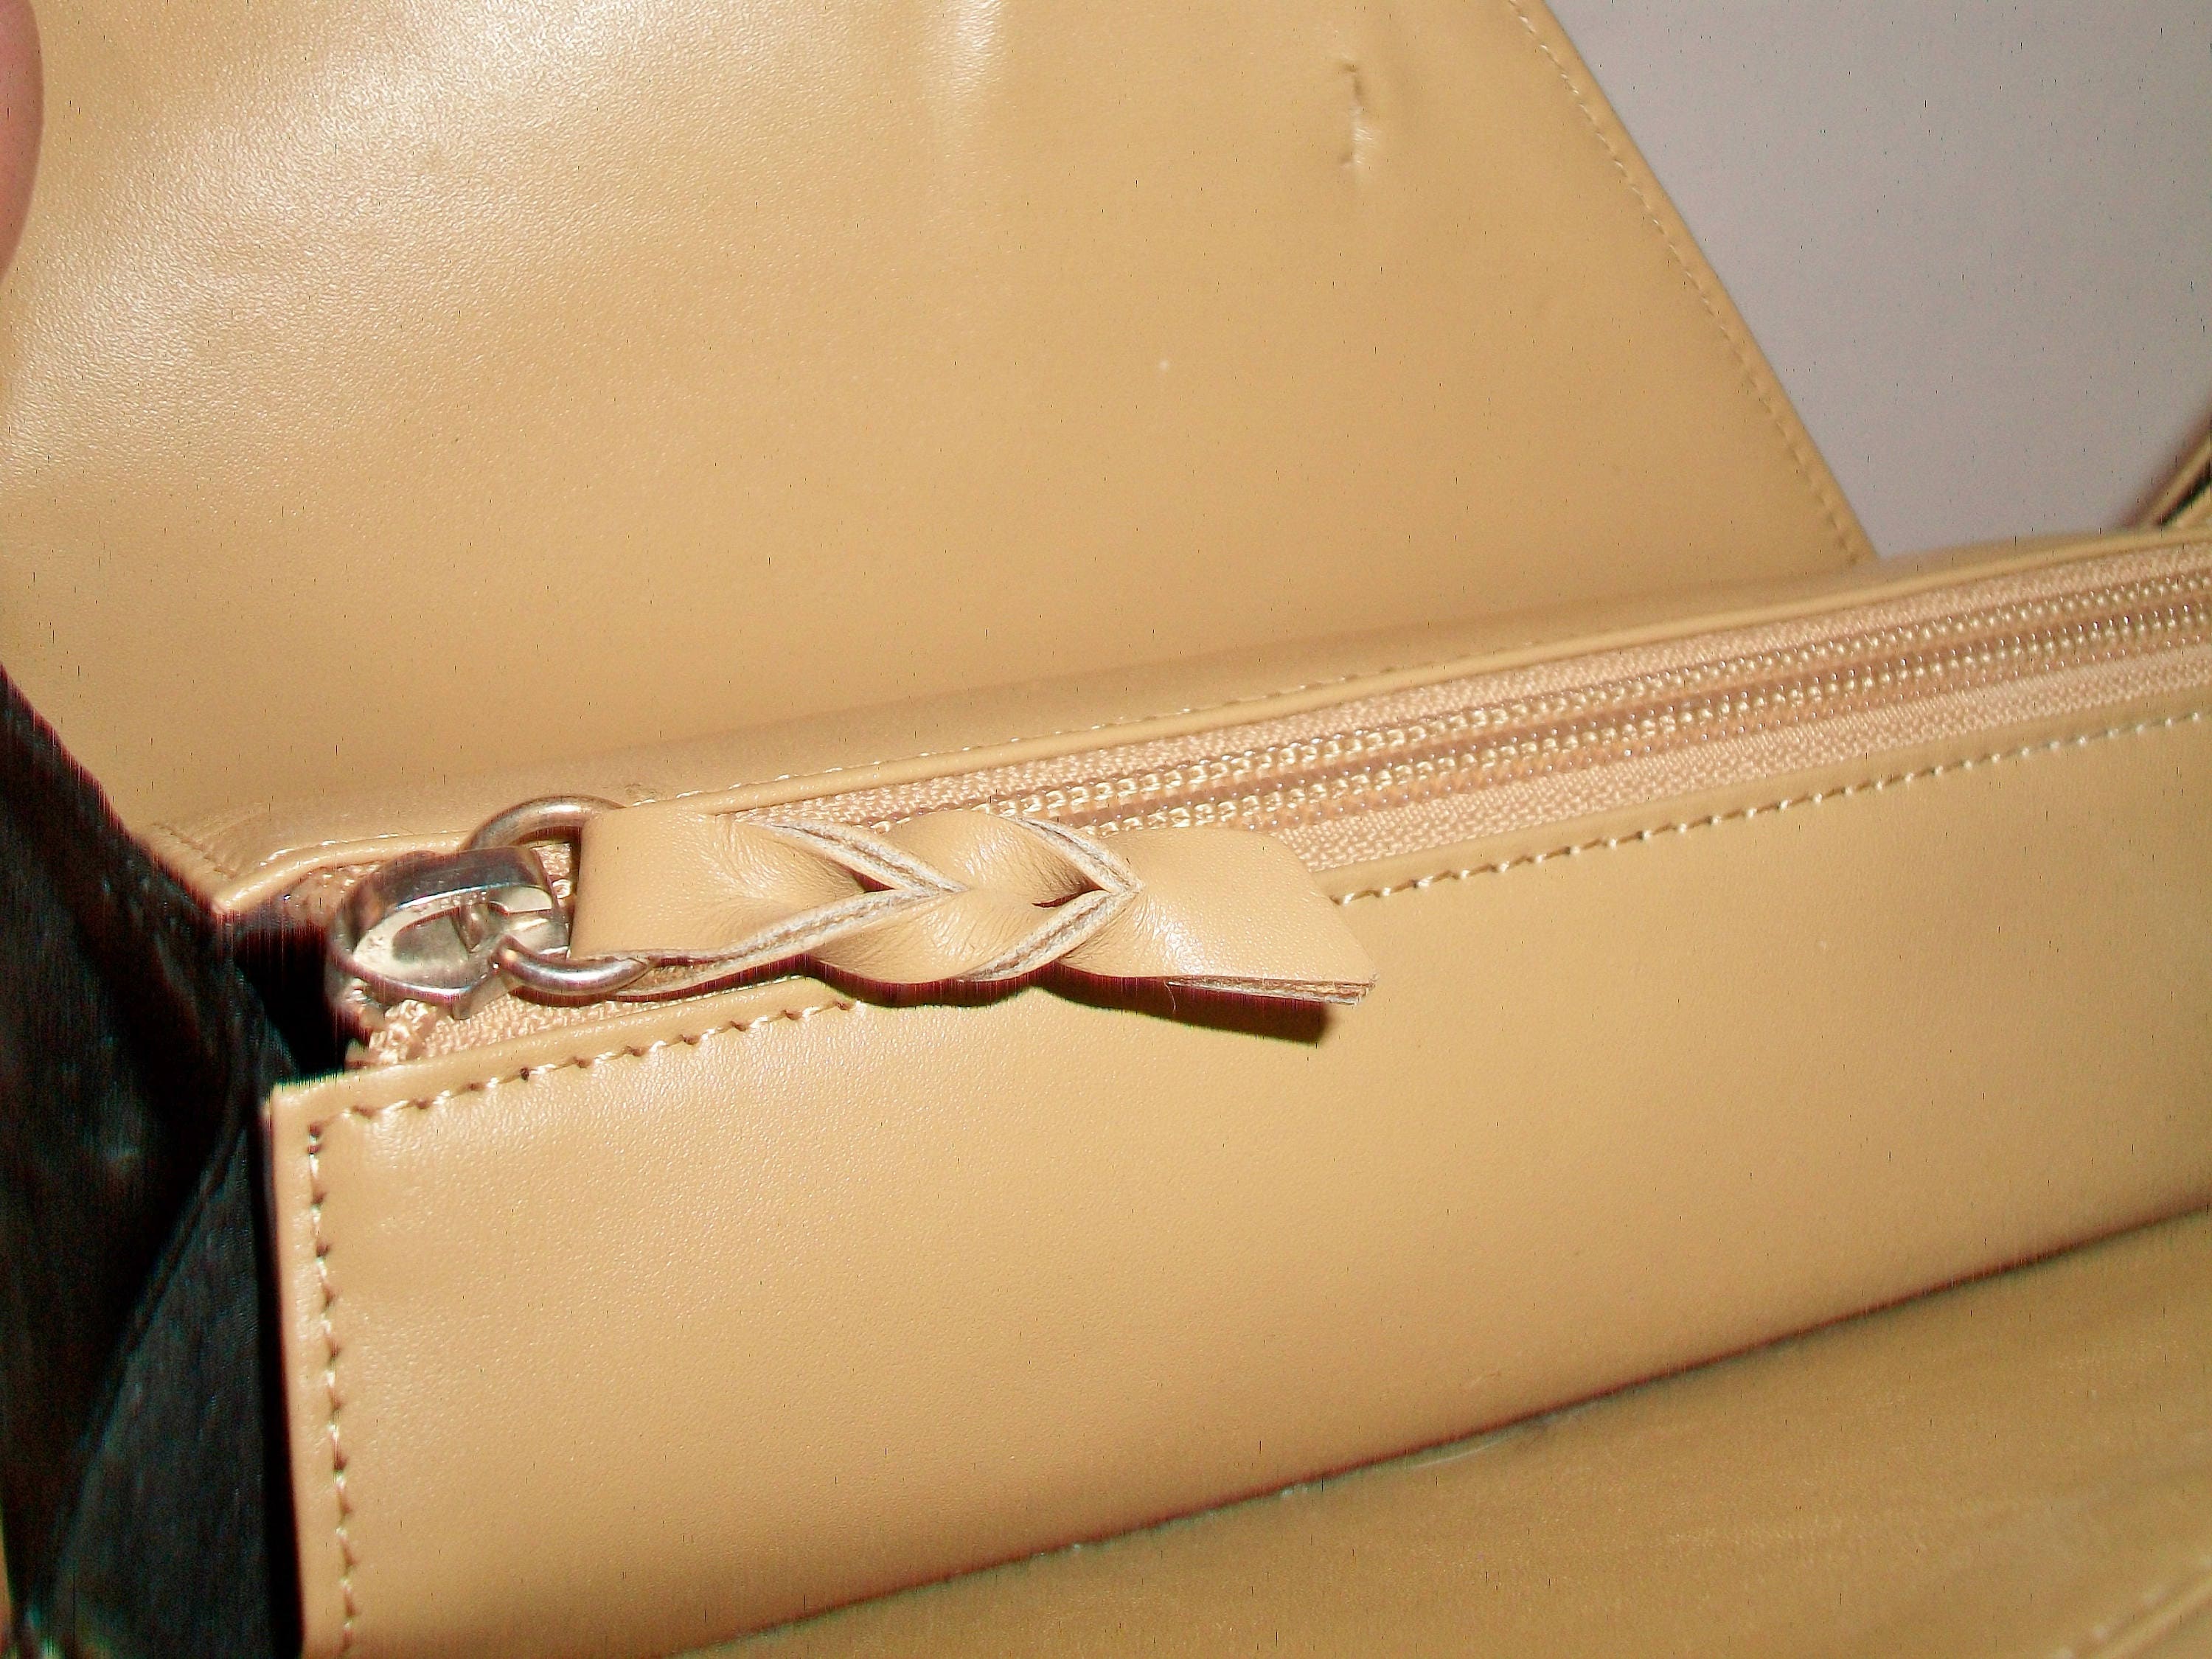 Franklin Covey, Bags, Yellow Leather Purse